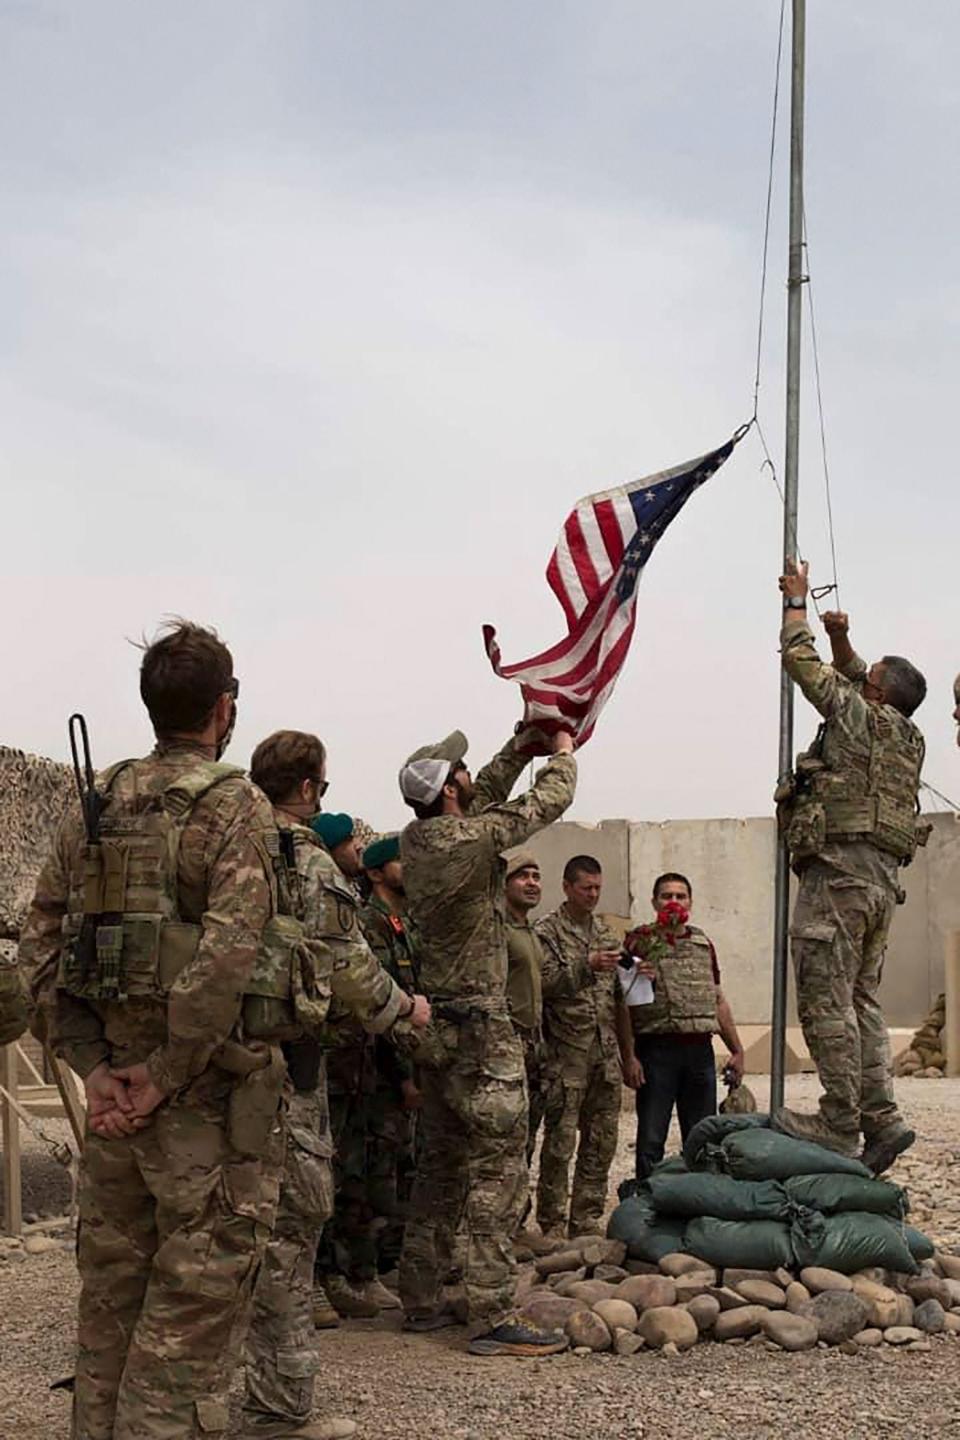 U.S. soldiers lowering the American flag during a handover ceremony in Helmand province to the Afghan National Army on May 2, 2021.